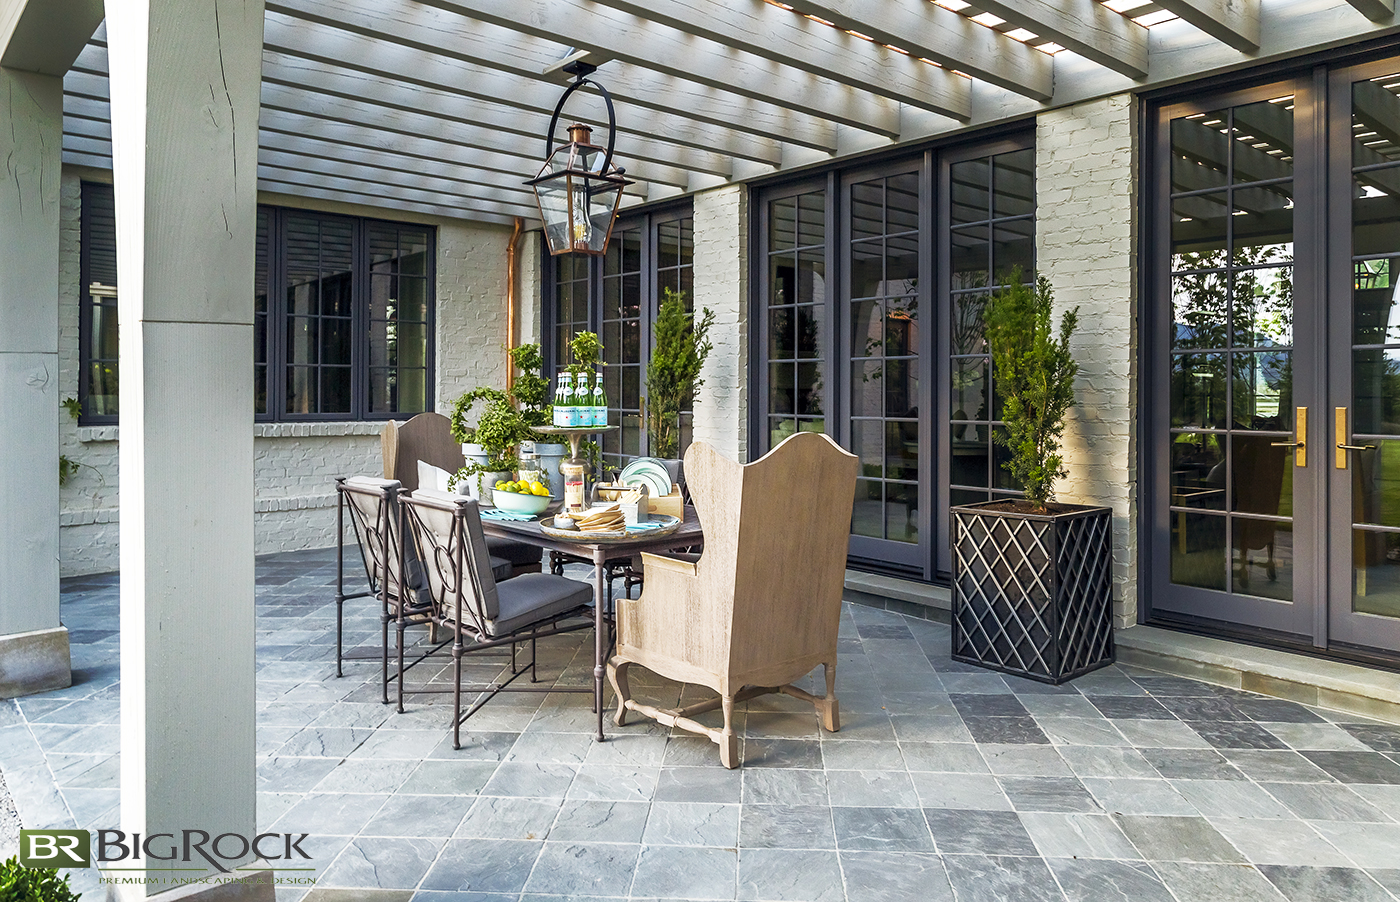 Extend your homes living space with an outdoor living hardscape with patio. Enjoy summer meals on a custom built patio with expert landscaping contractors. Big Rock Landscaping can build you your dream patio.